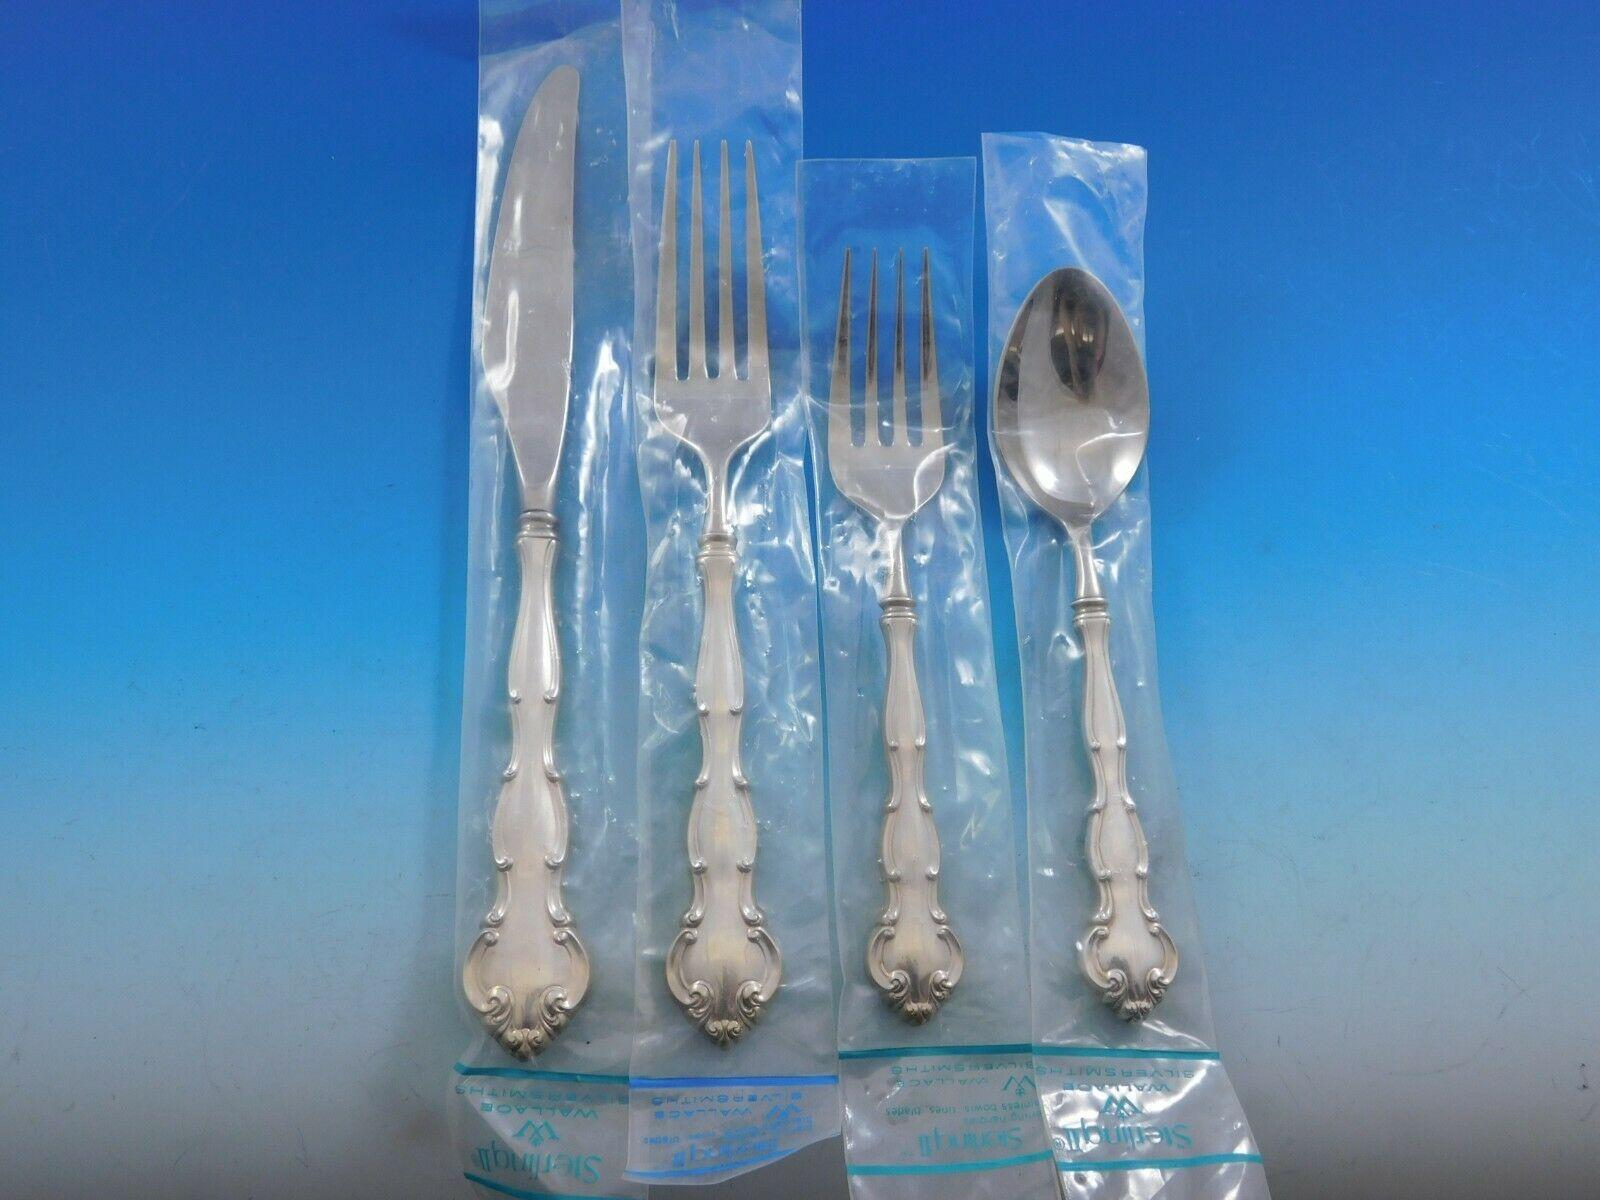 Unused scarborough by Wallace hollow sterling silver with stainless implement flatware set - 24 pieces. Great starter set! This set includes:

6 knives, 8 7/8